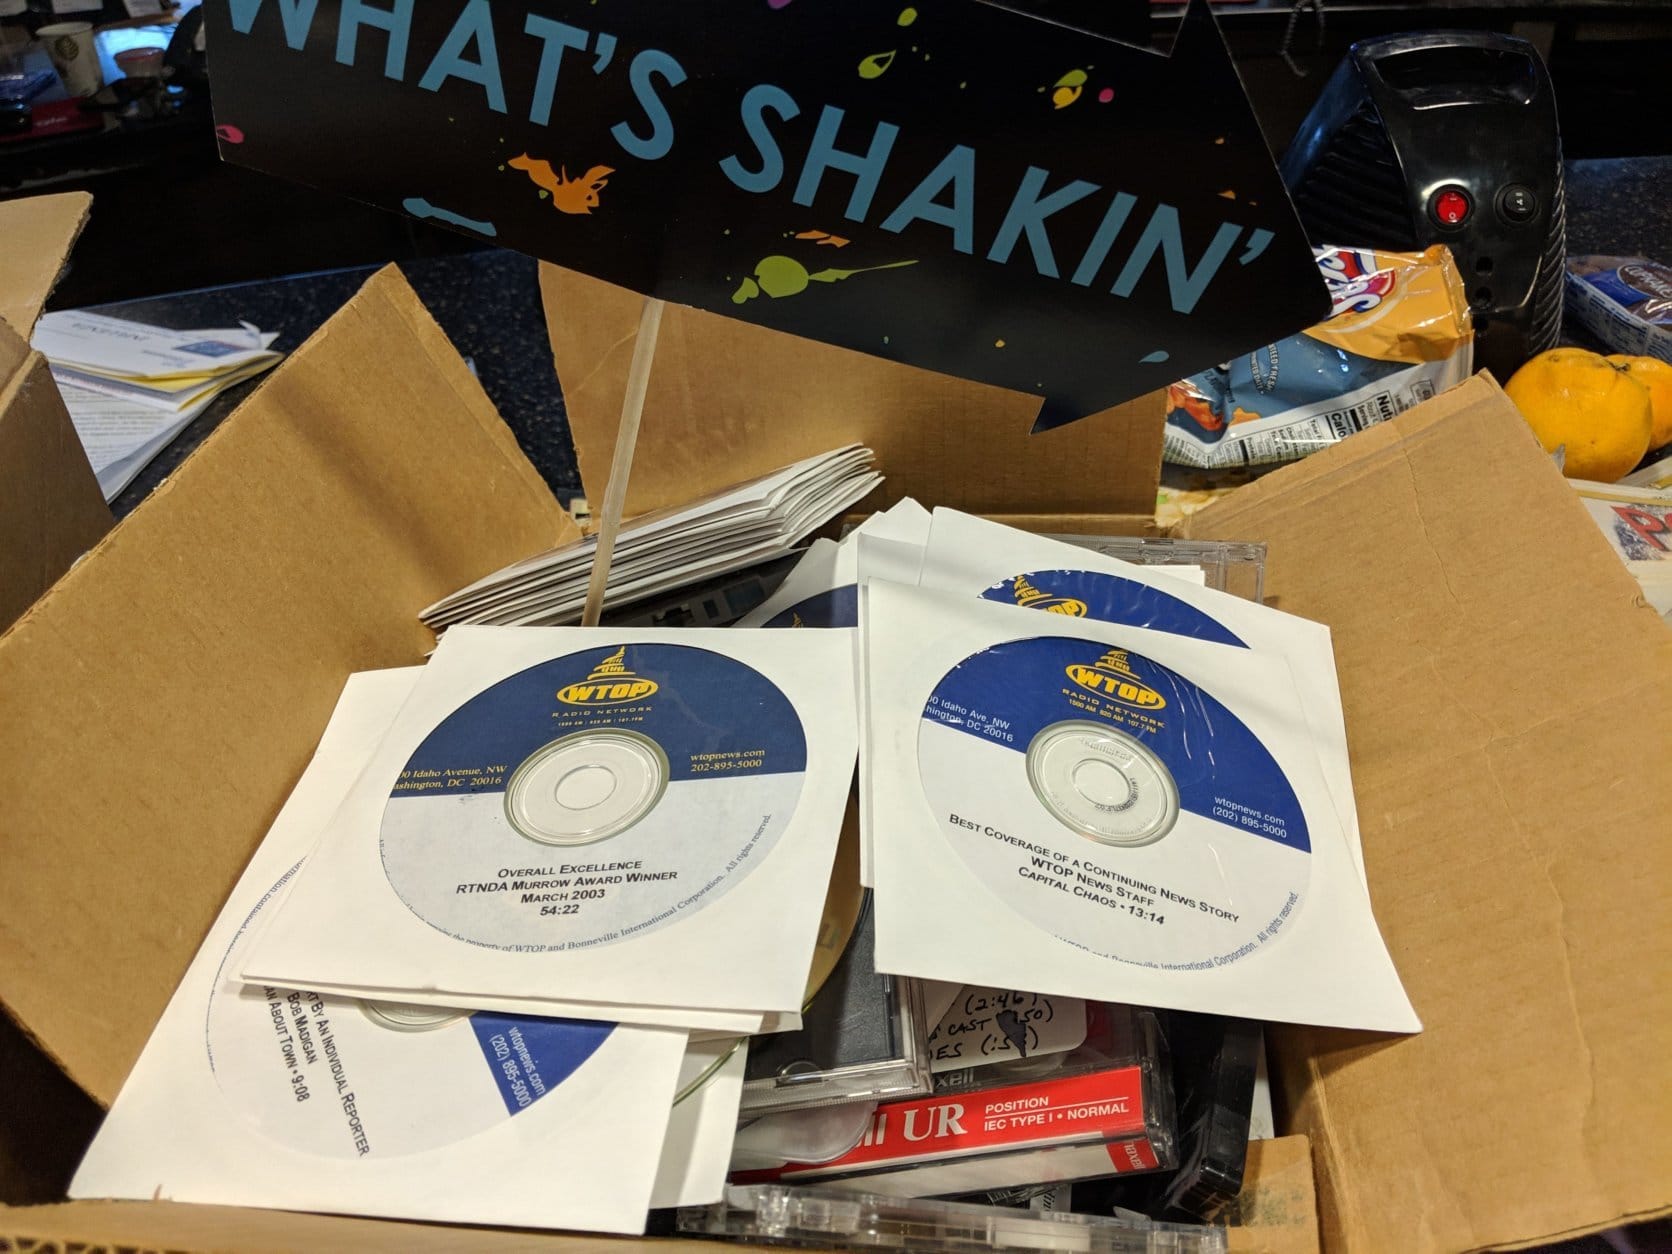 To win those awards, a news organization submits a collection of its best work. Some discs were never sent out. (WTOP/Jack Pointer)